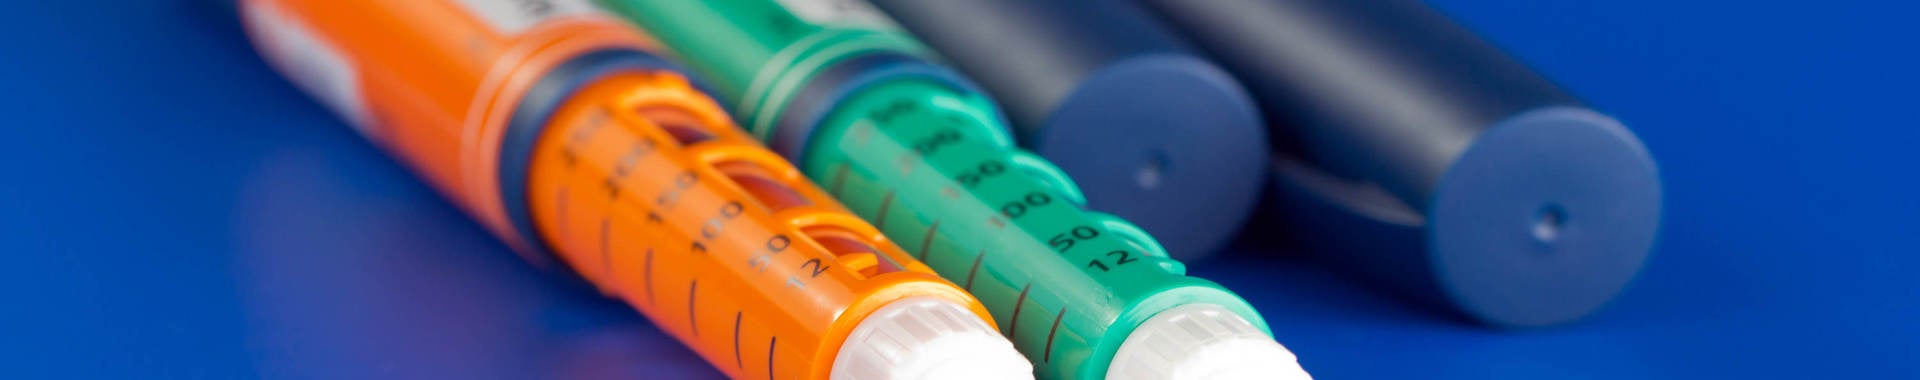 image of colorful syringes used for dispensing pharmaceuticals